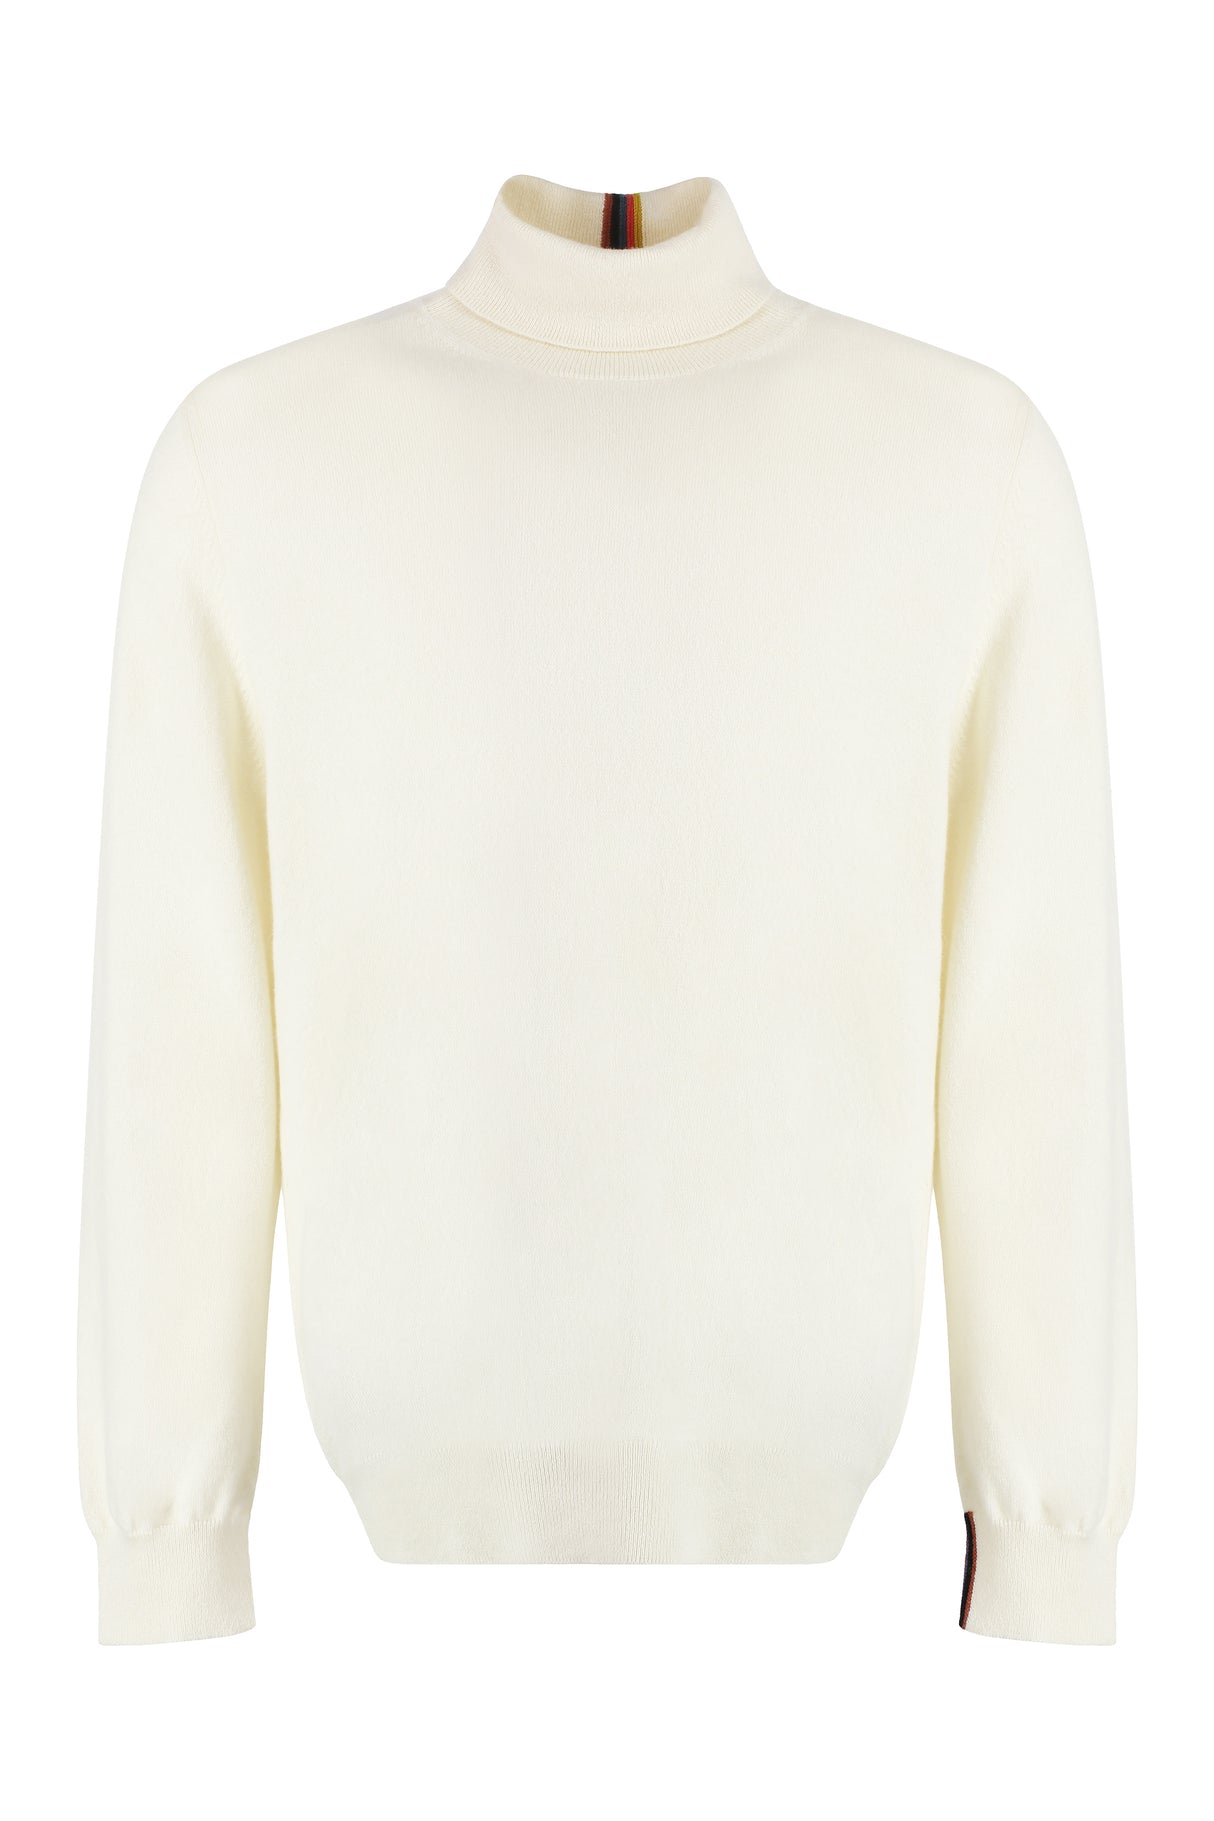 PAUL SMITH Men's White Cashmere Turtleneck Sweater for FW23